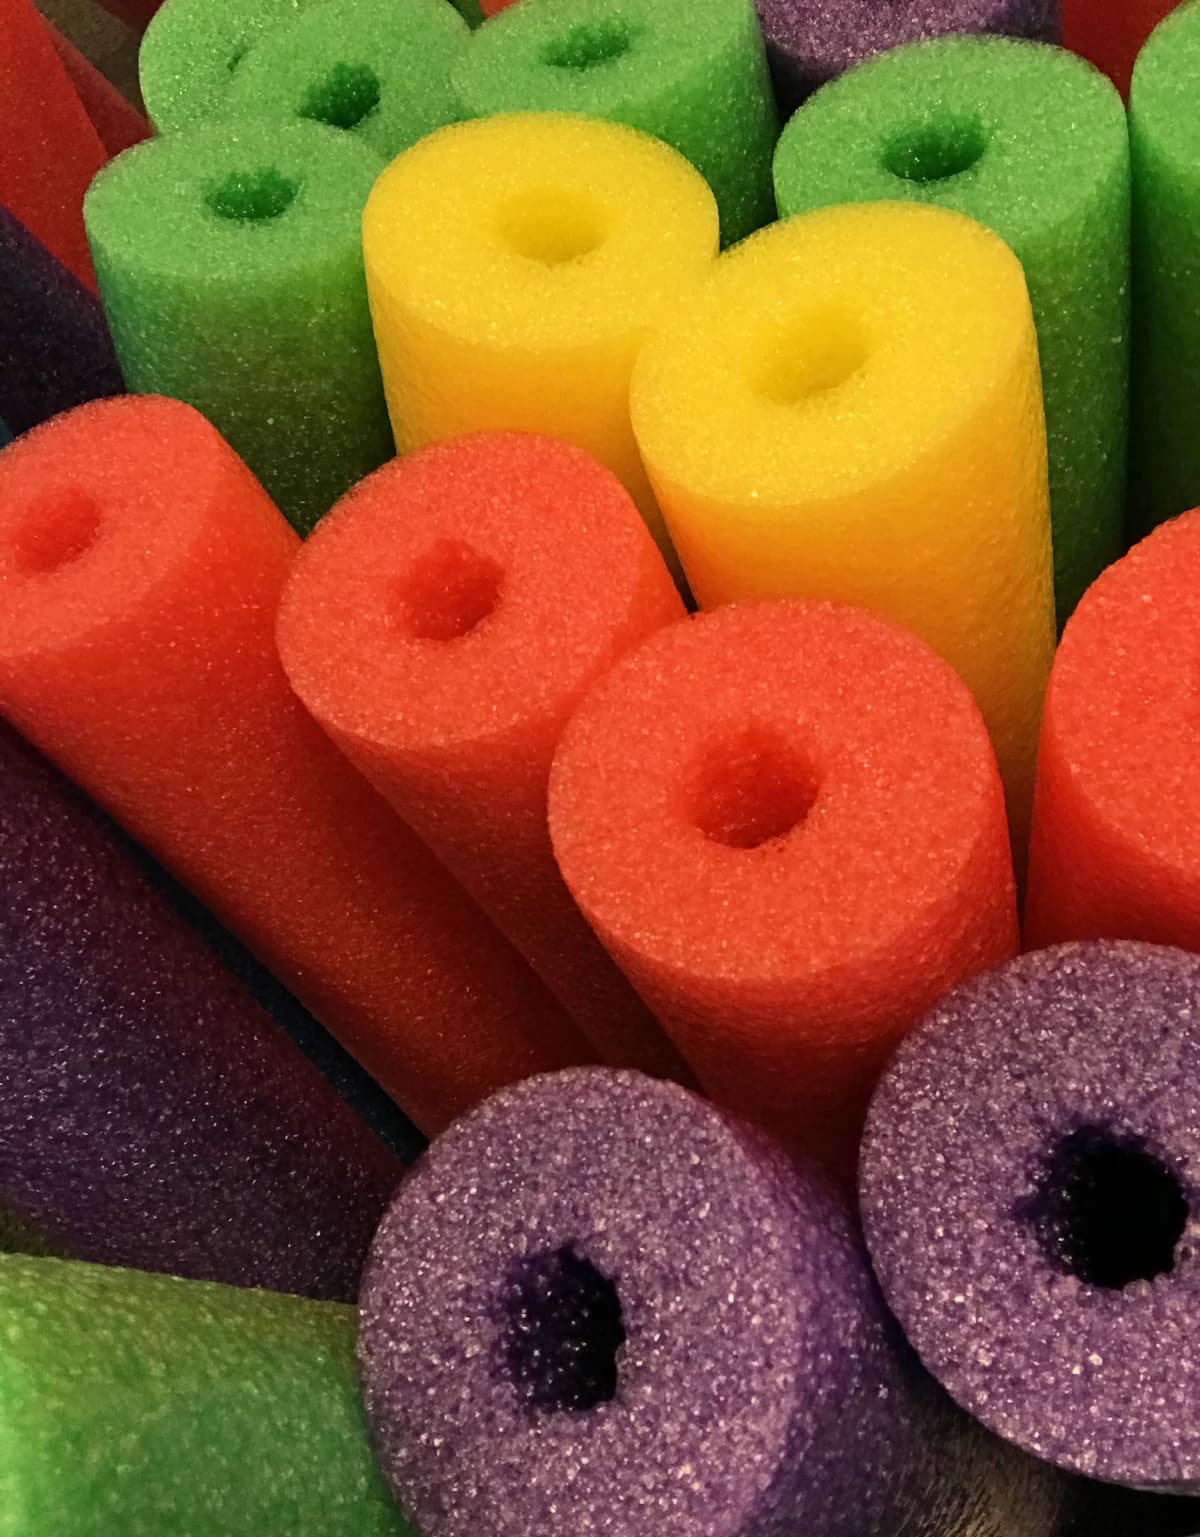 Pool noodles in assorted colors